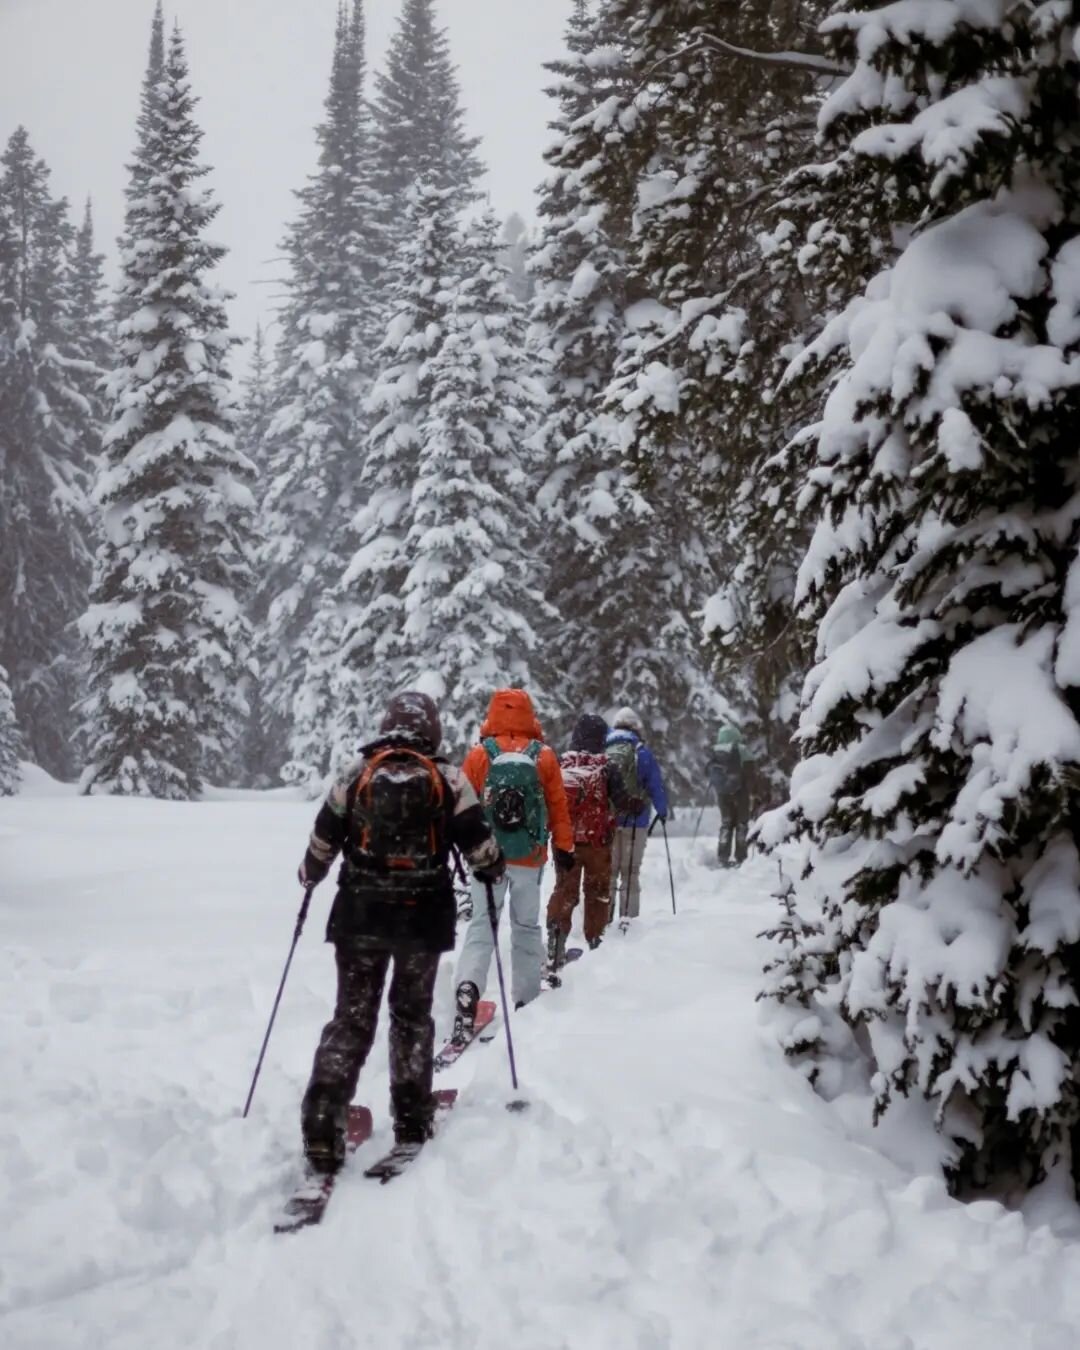 Some wintry snapshots from an all-ladies avalanche course/hut trip in Cooke City.